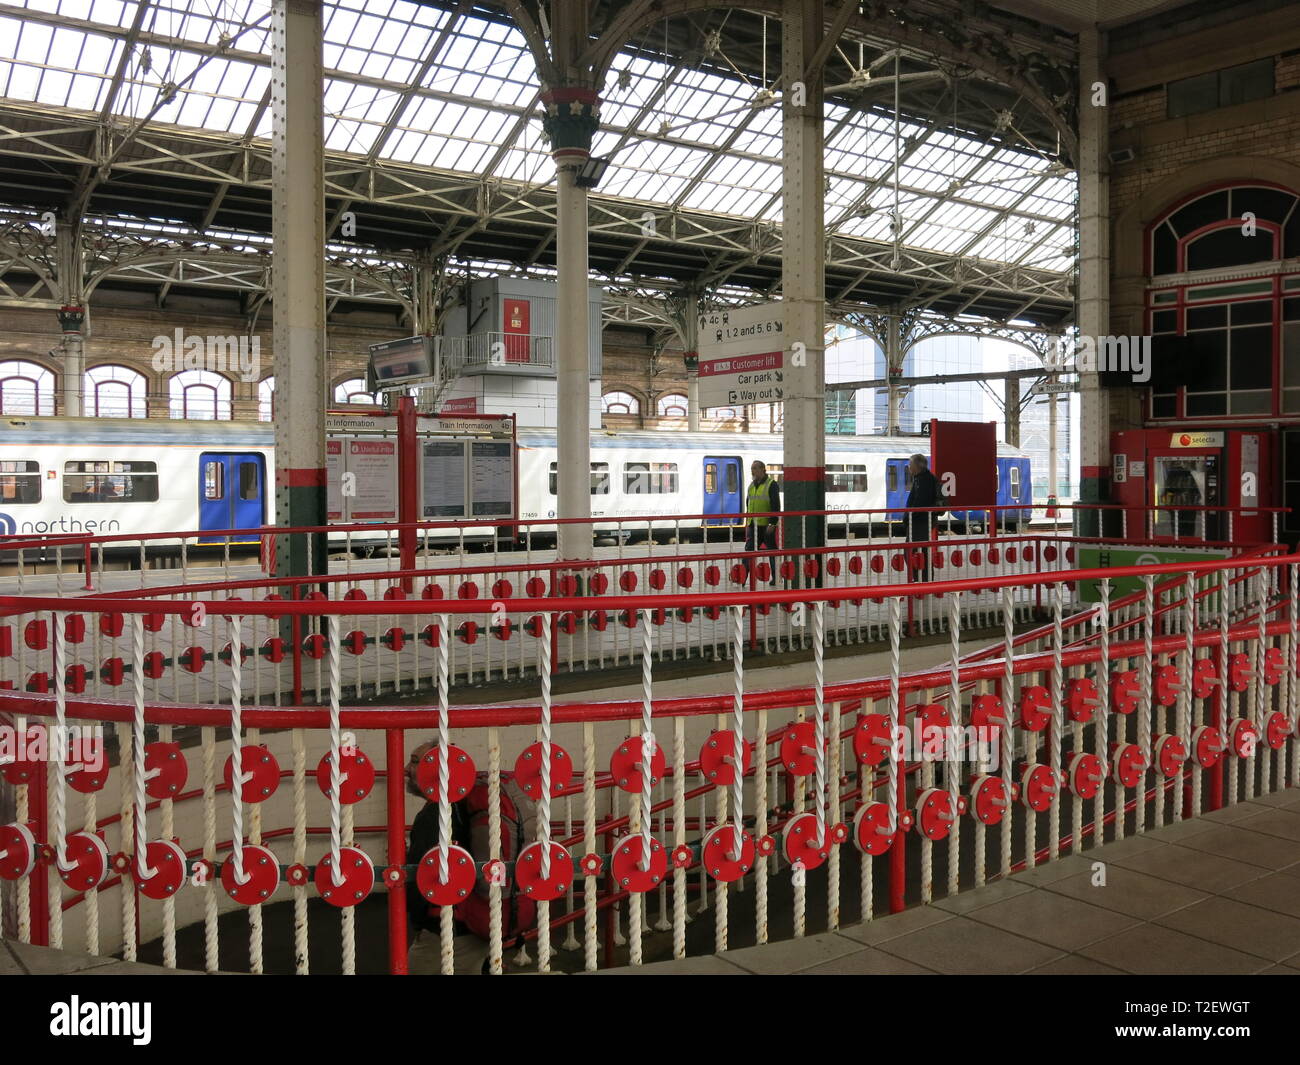 View of Preston railway station showing Victorian architecture, ornate ironwork, glazed roof, platforms and trains. Stock Photo